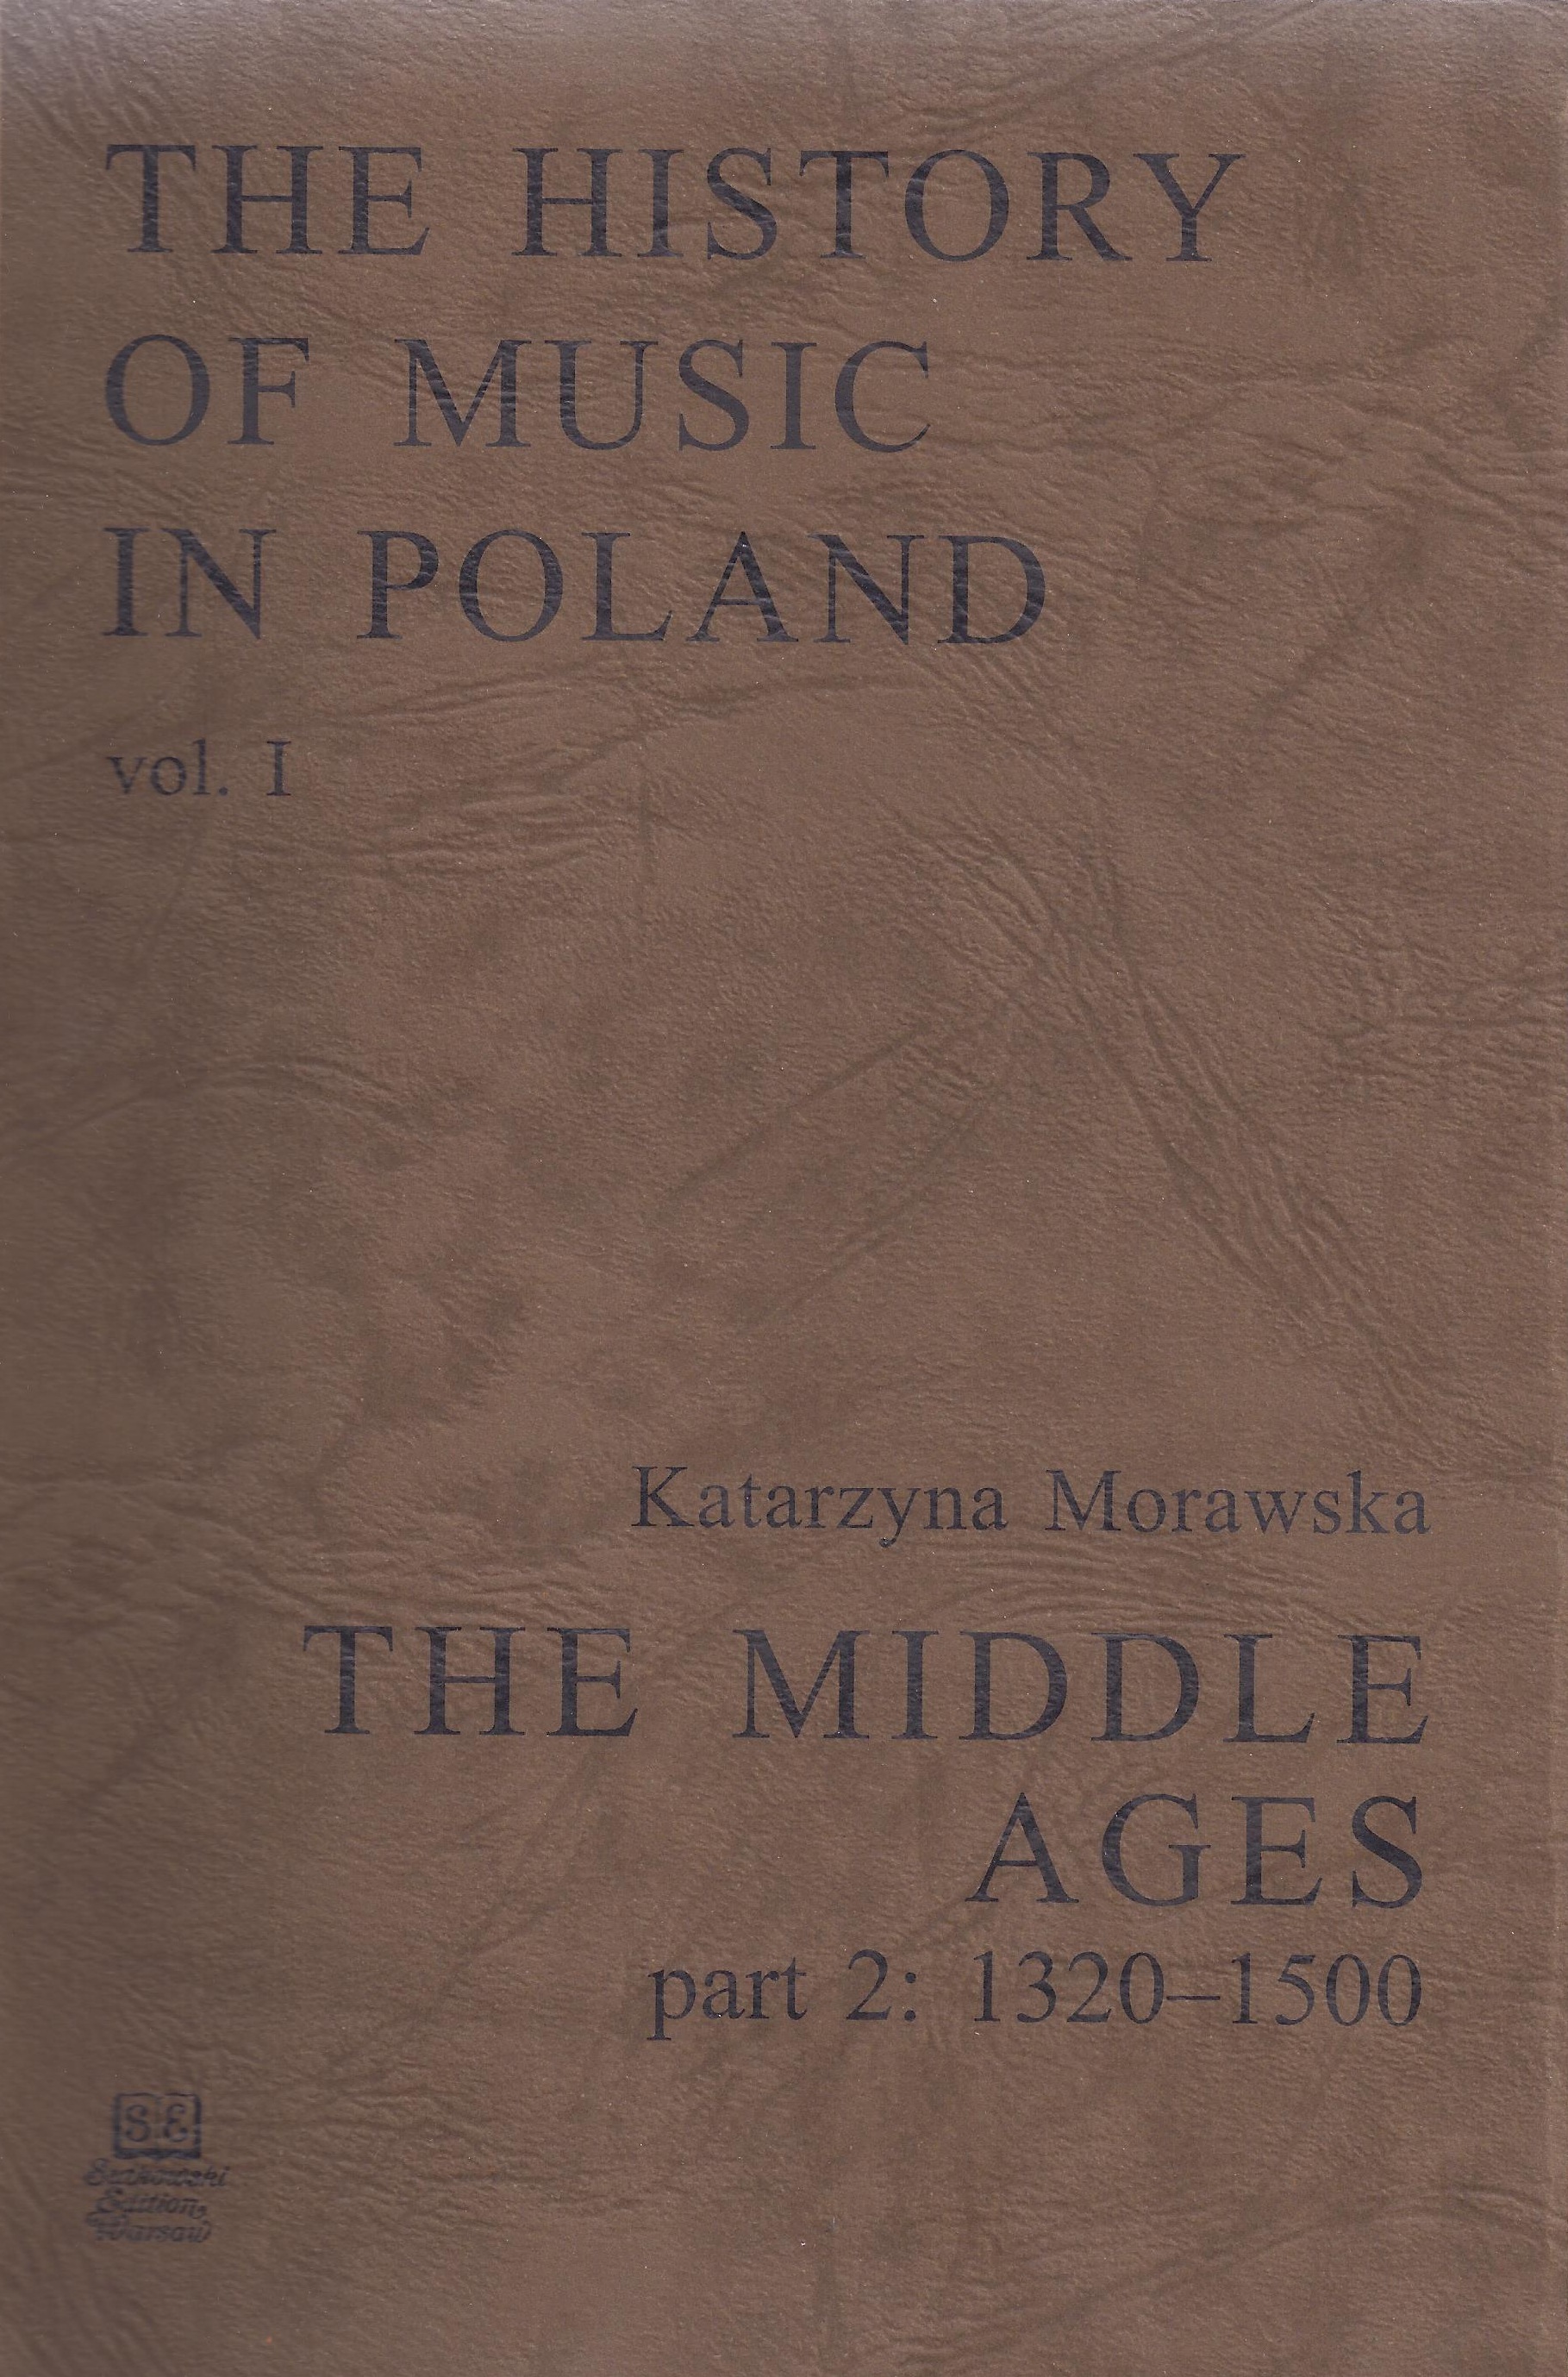 The History of Music in Poland vol I Part 2 - The Middle Ages (1320-1500)